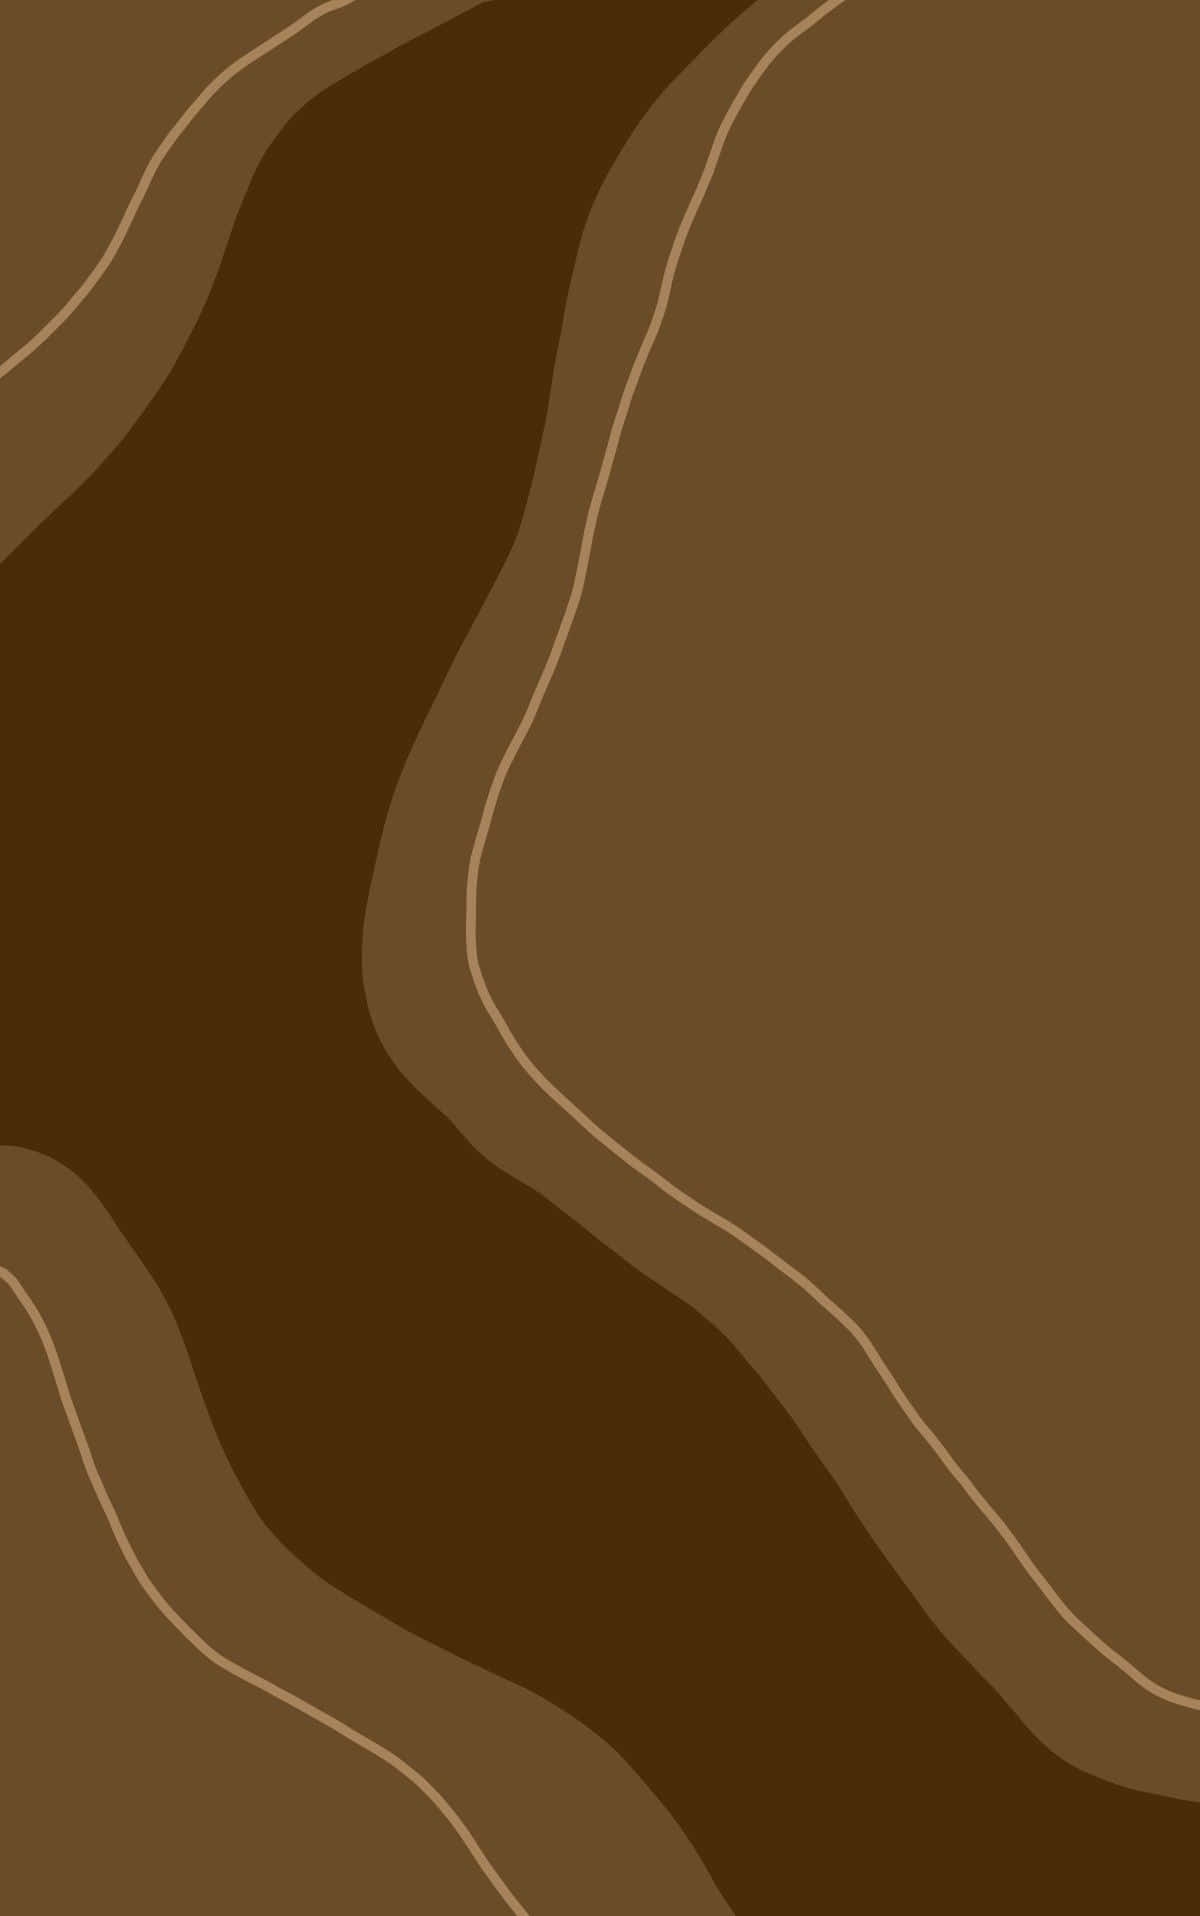 A Brown And White River With A Brown Background Background